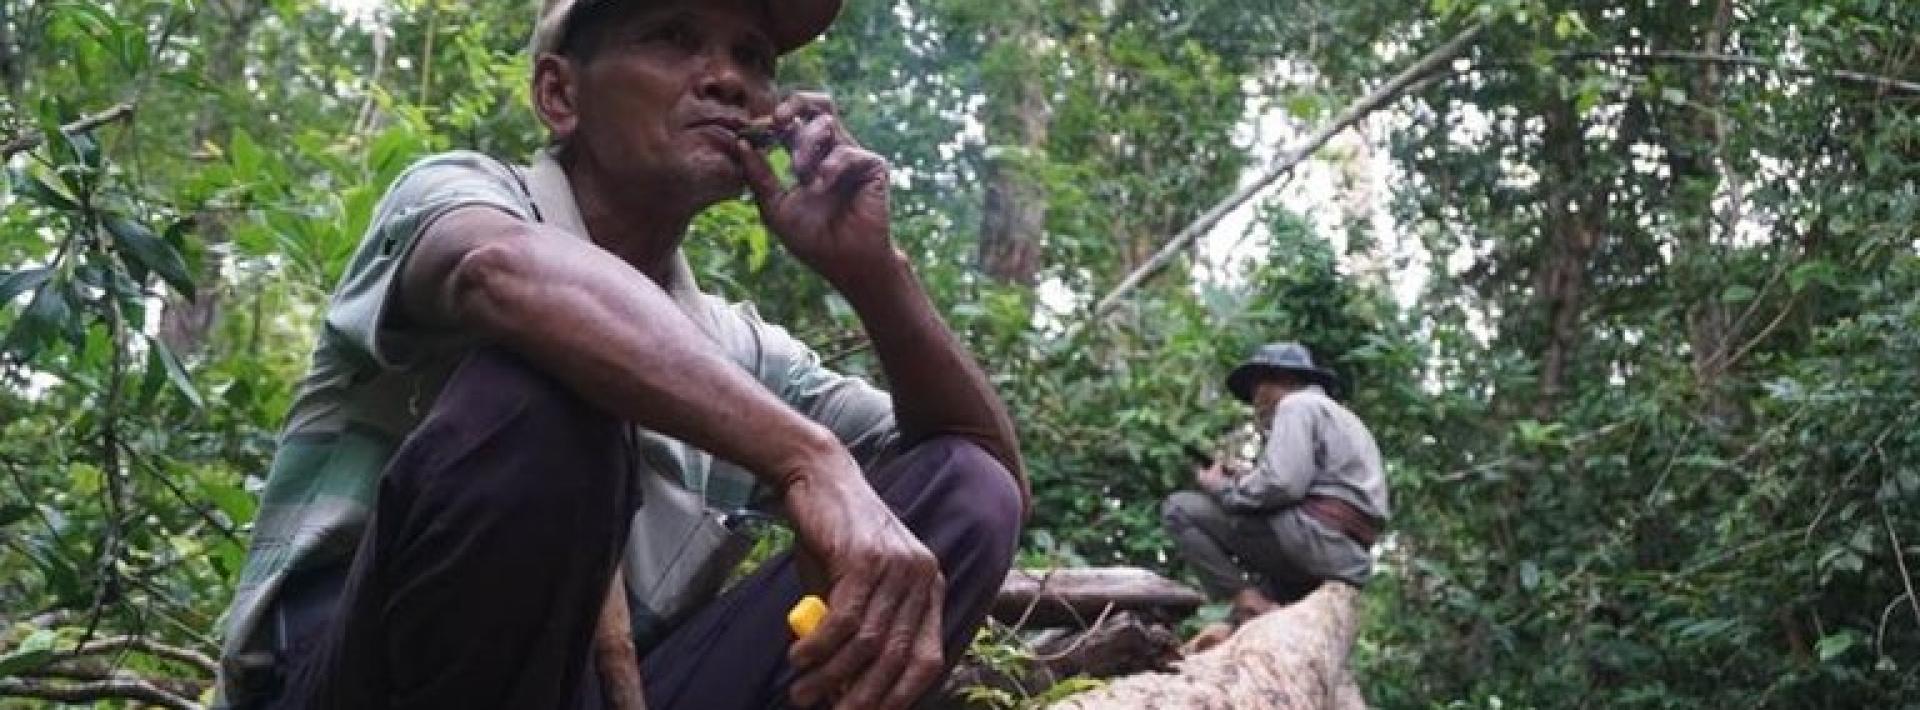 Meet the 'vigilante' grandfathers protecting indigenous forest life in Cambodia